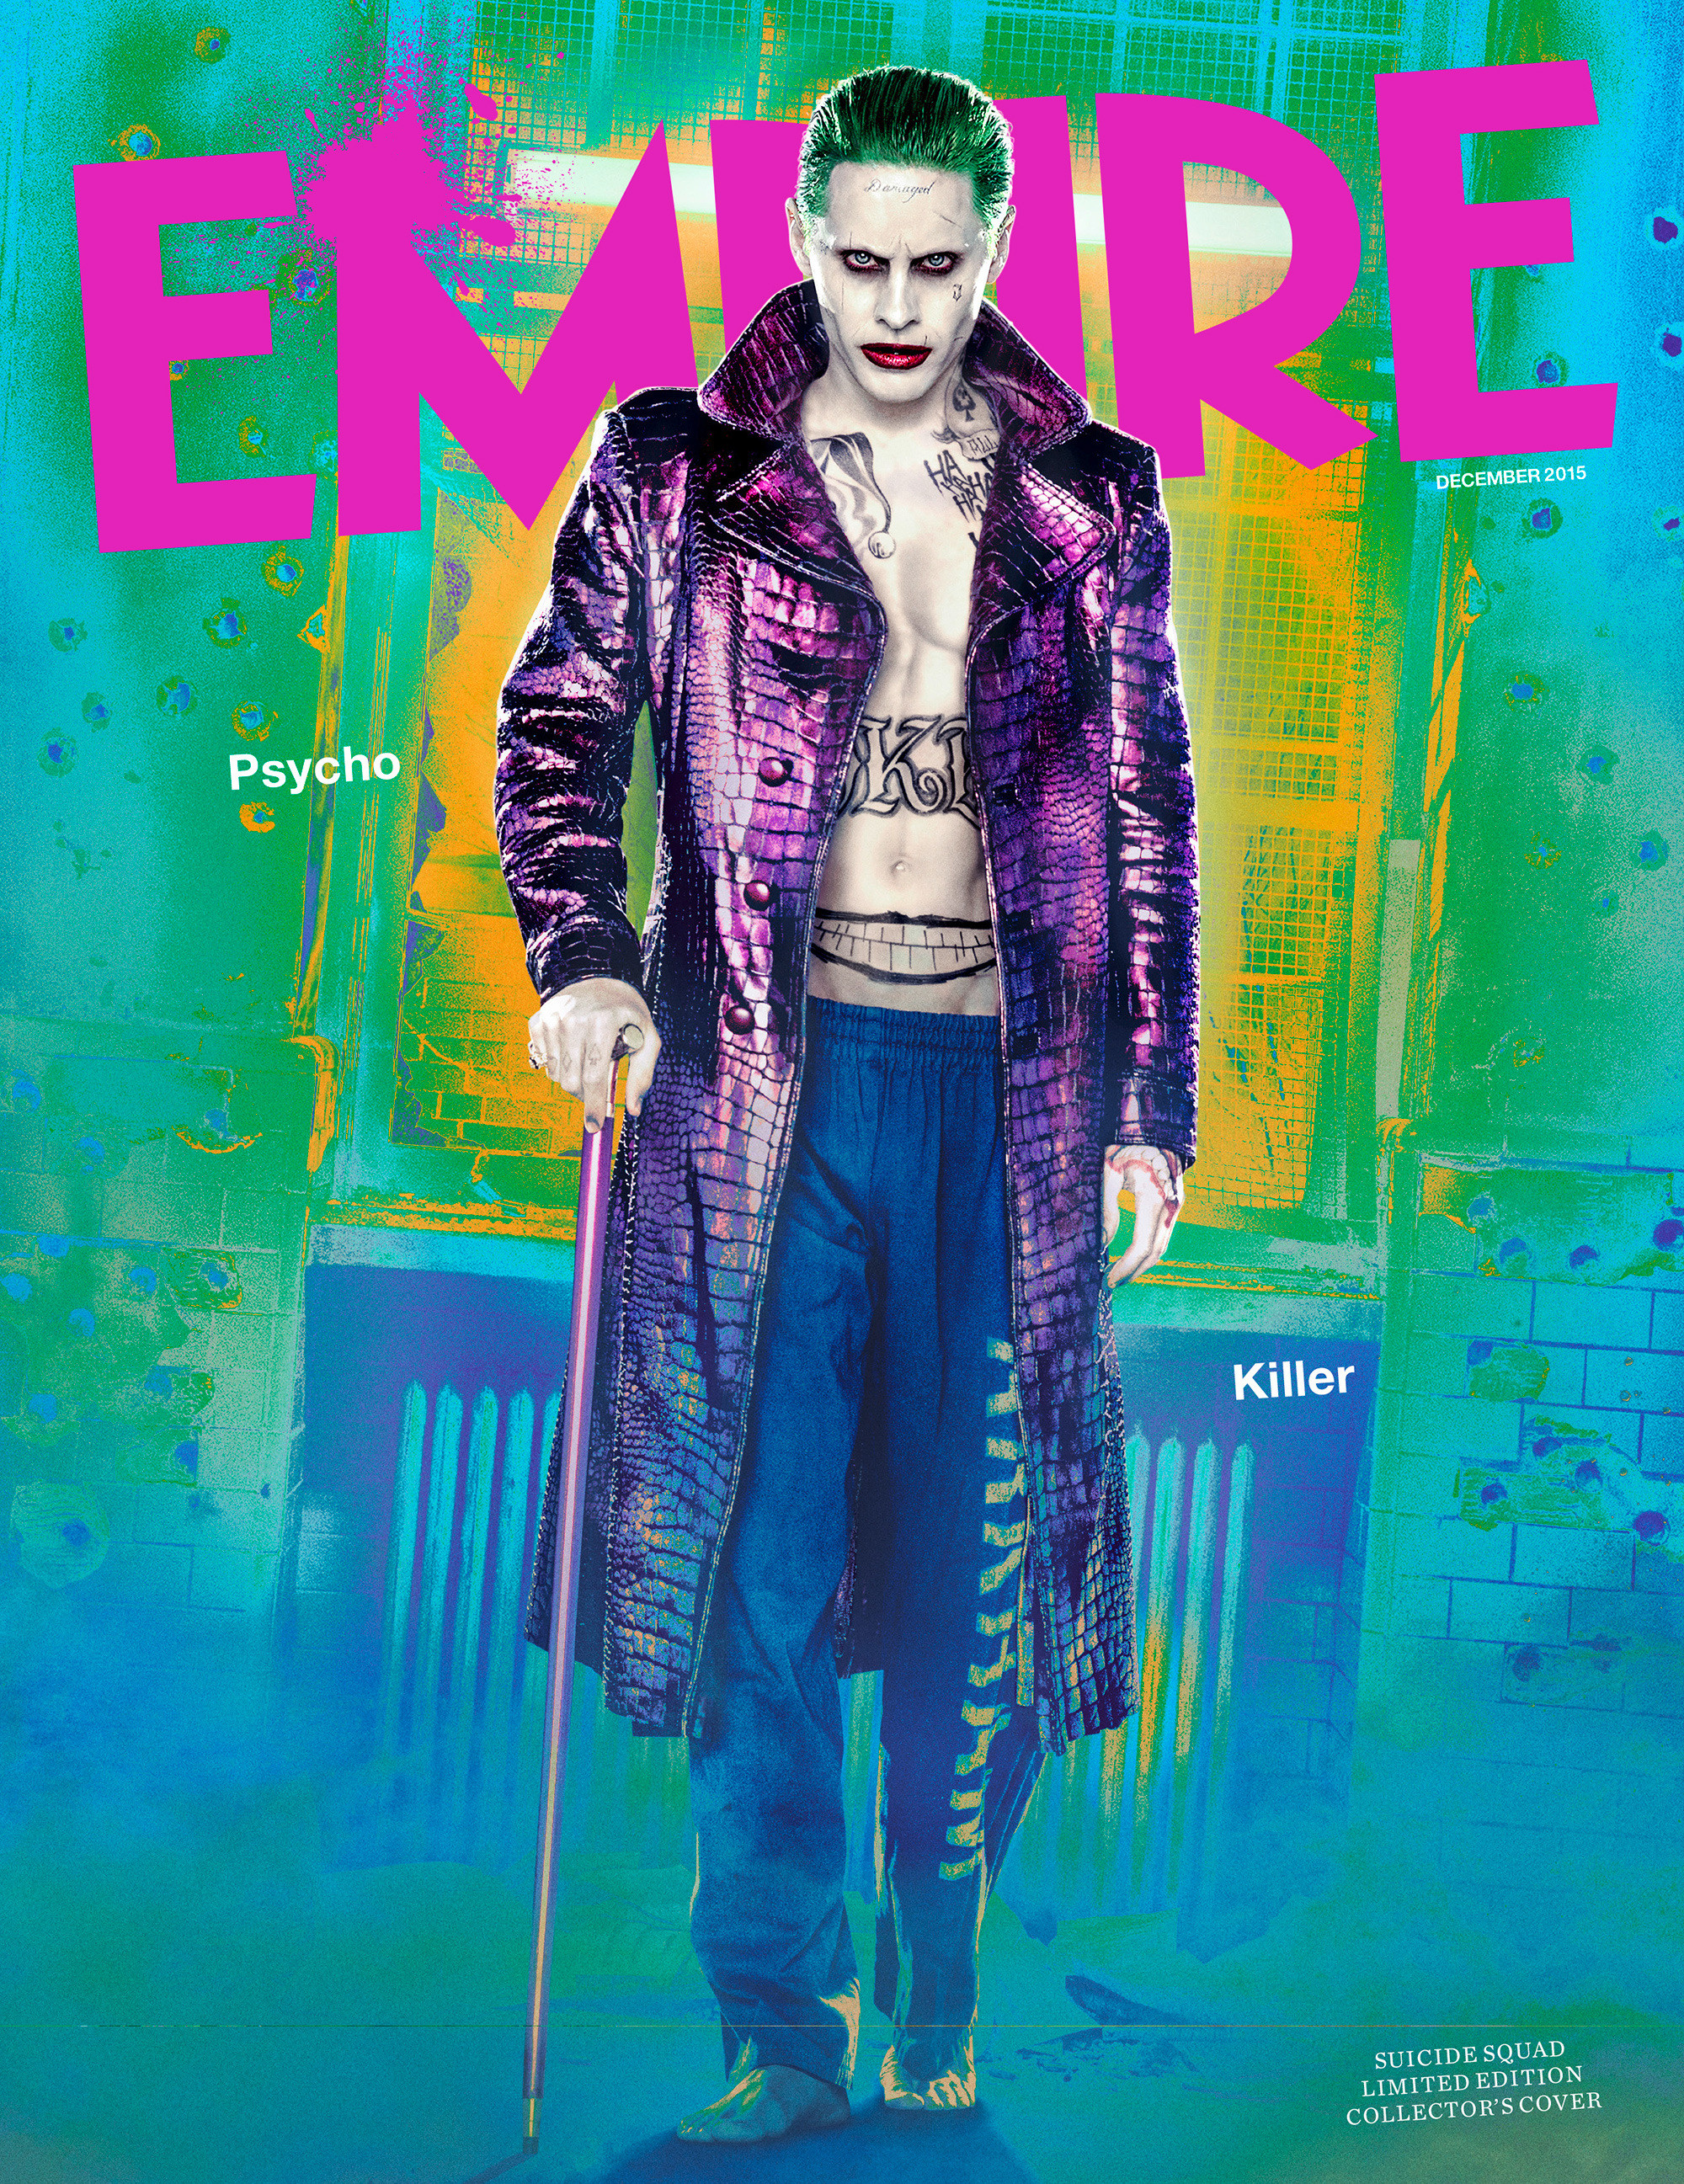 2000x2594 Suicide Squad images Suicide Squad Character Portraits The Joker. Jared Leto  Joker Hd Wallpaper Iphone.Jared Leto Joker Wallpaper